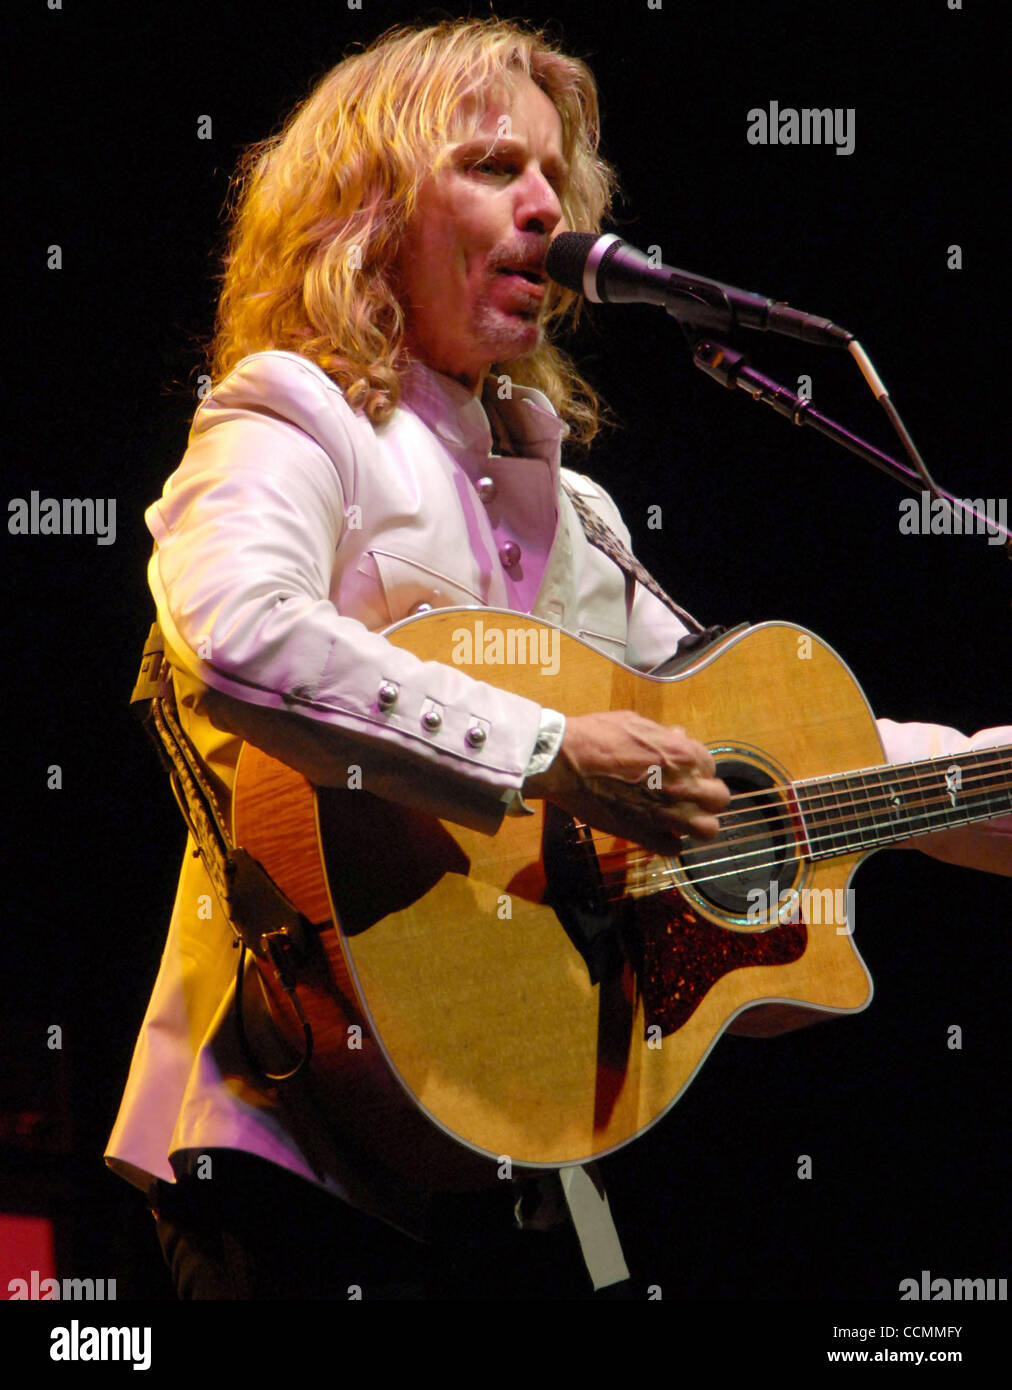 Oct 28, 2010 - New York, New York, U.S. - Singer/guitarist TOMMY SHAW and rock band STYX performing live in concert at the Beacon Theater in NYC. (Credit Image: © Jeffrey Geller/ZUMApress.com) Stock Photo